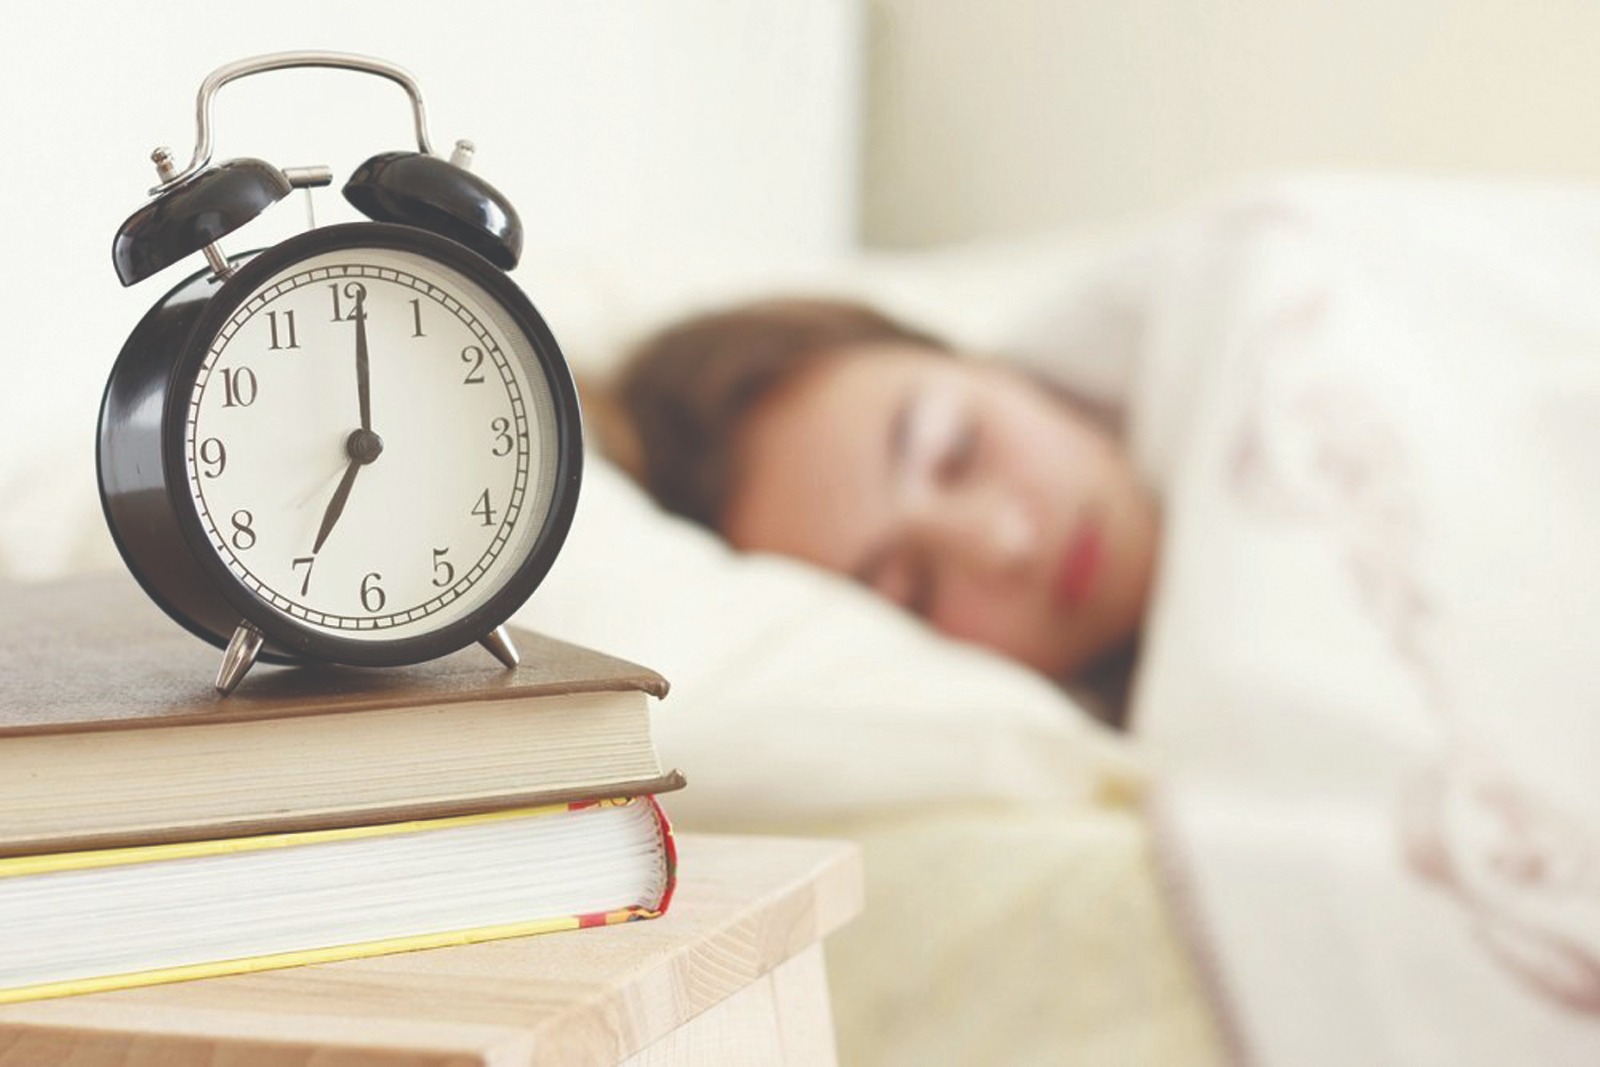 The importance of sleep hygiene for health and quality of life